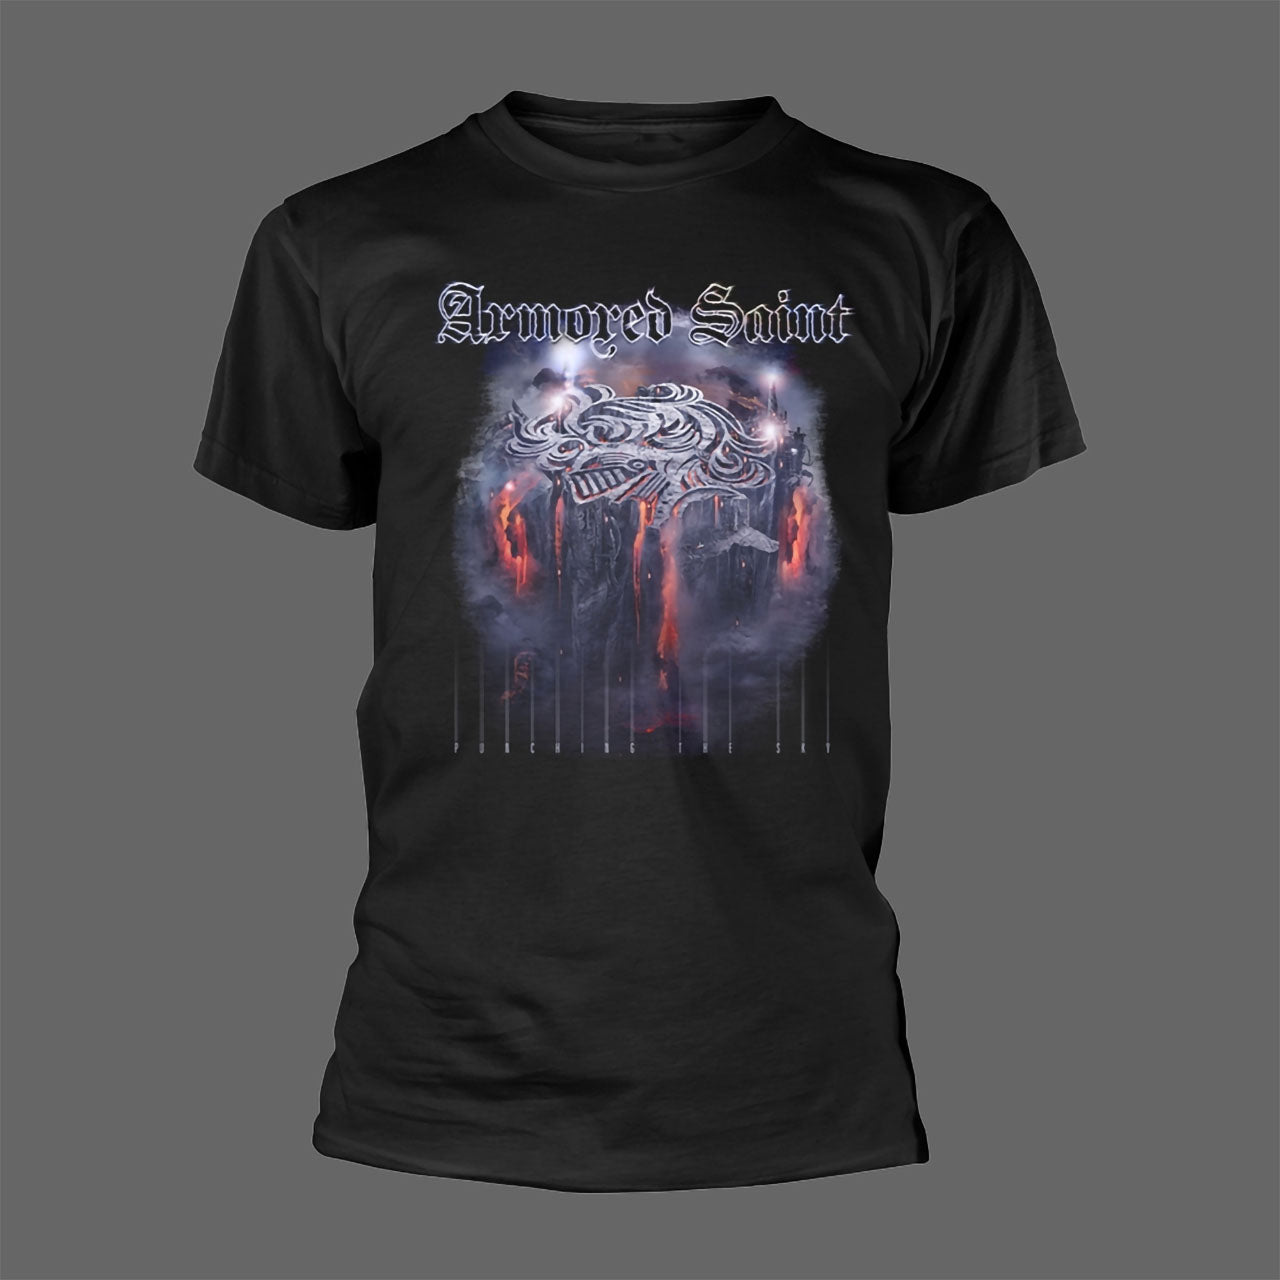 Armored Saint - Punching the Sky (T-Shirt)